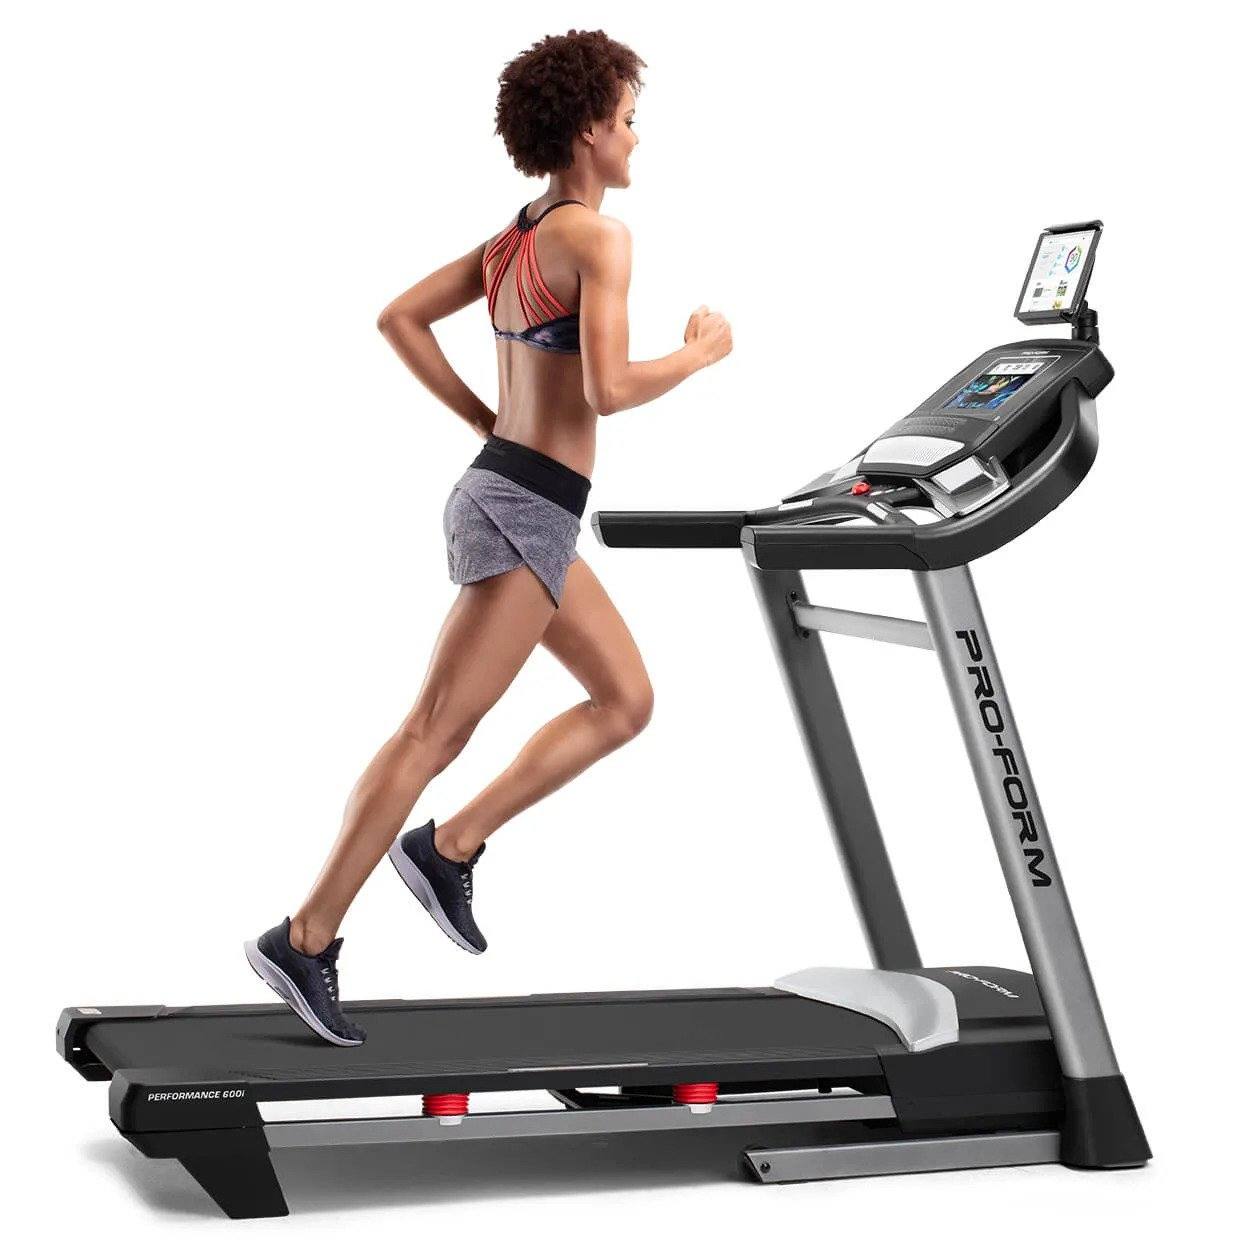 Awesome Proform Performance 600i Treadmill Review 2020